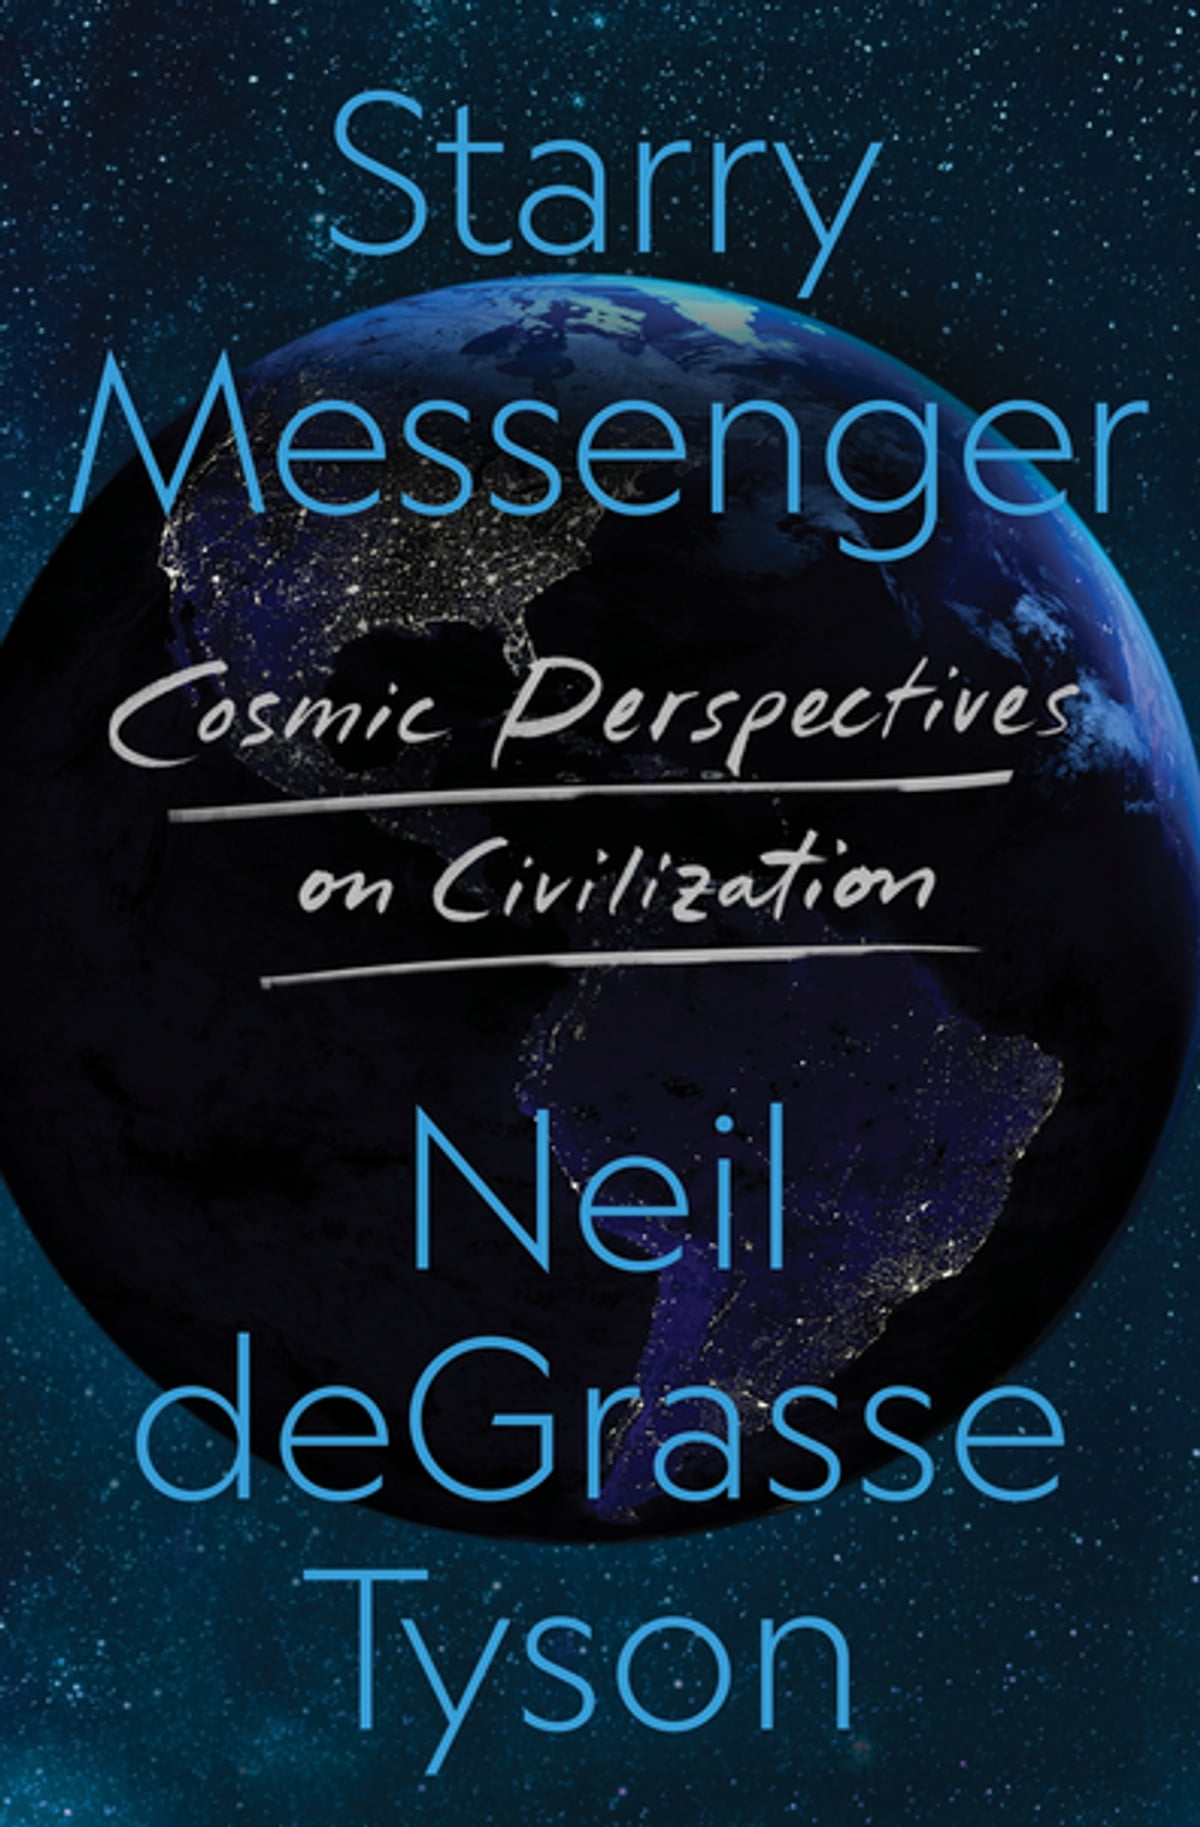 Starry Messenger: Cosmic Perspectives on Civilization (Henry Holt and Co.)